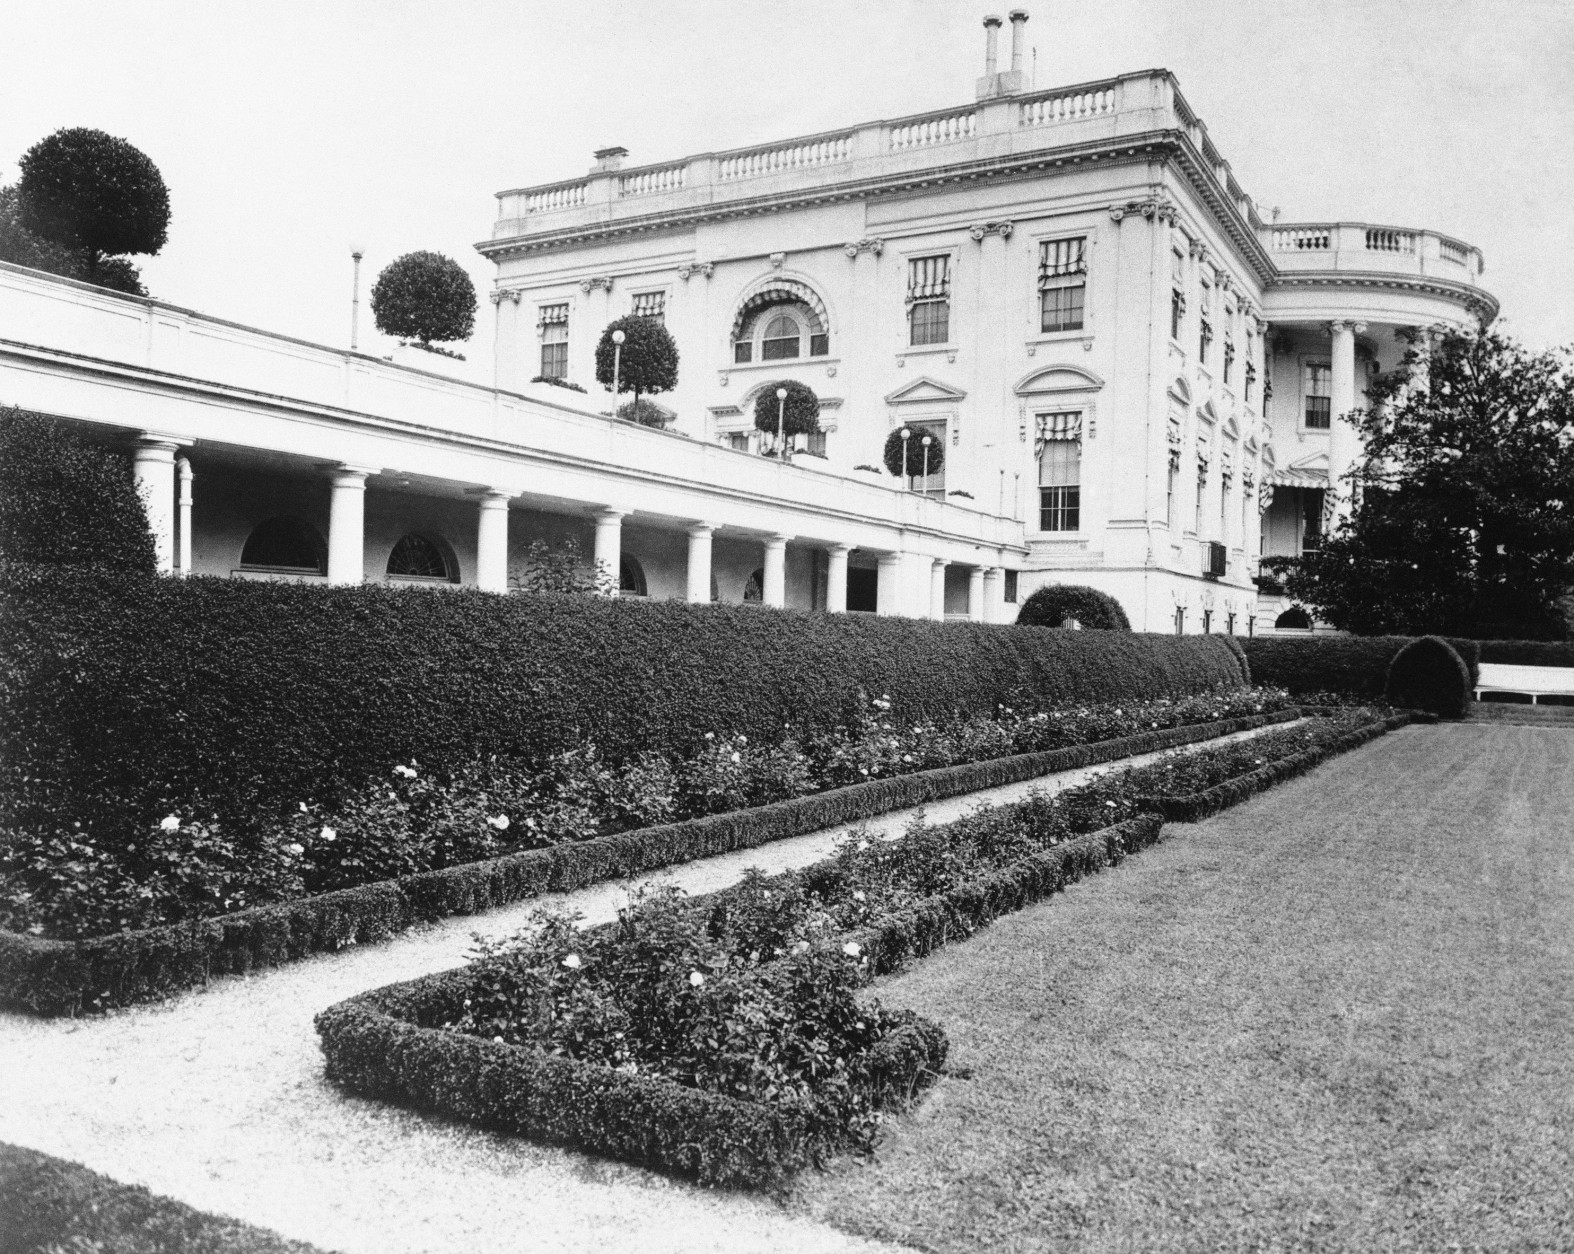 Shown in photo is White House South Portico and portion of Rose Garden in Washington, D.C. in 1921. (AP Photo)